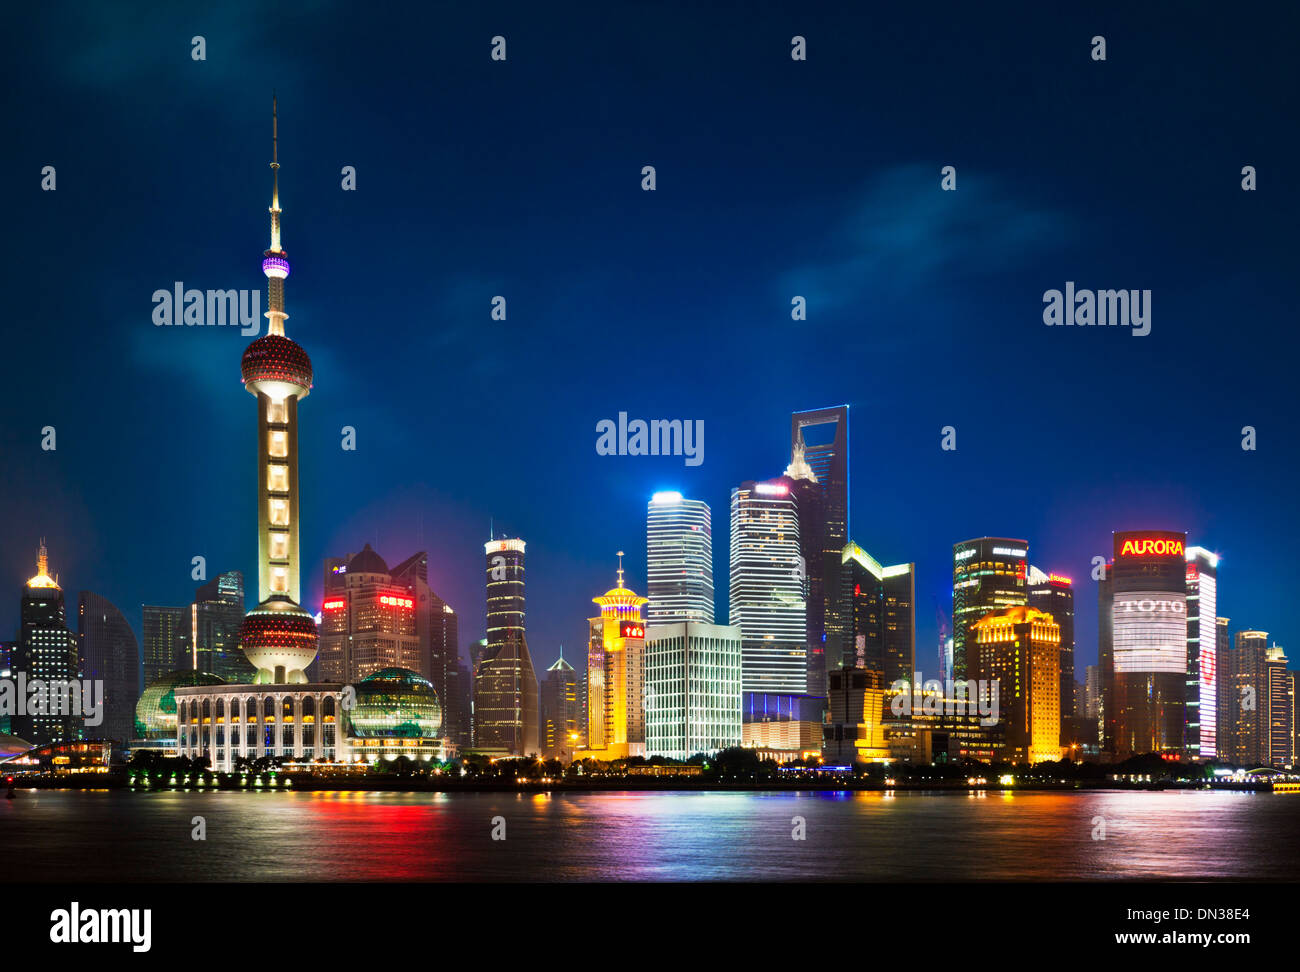 Shanghai pudong Skyline with Oriental Pearl illuminated at night PRC, People's Republic of China, Asia Stock Photo